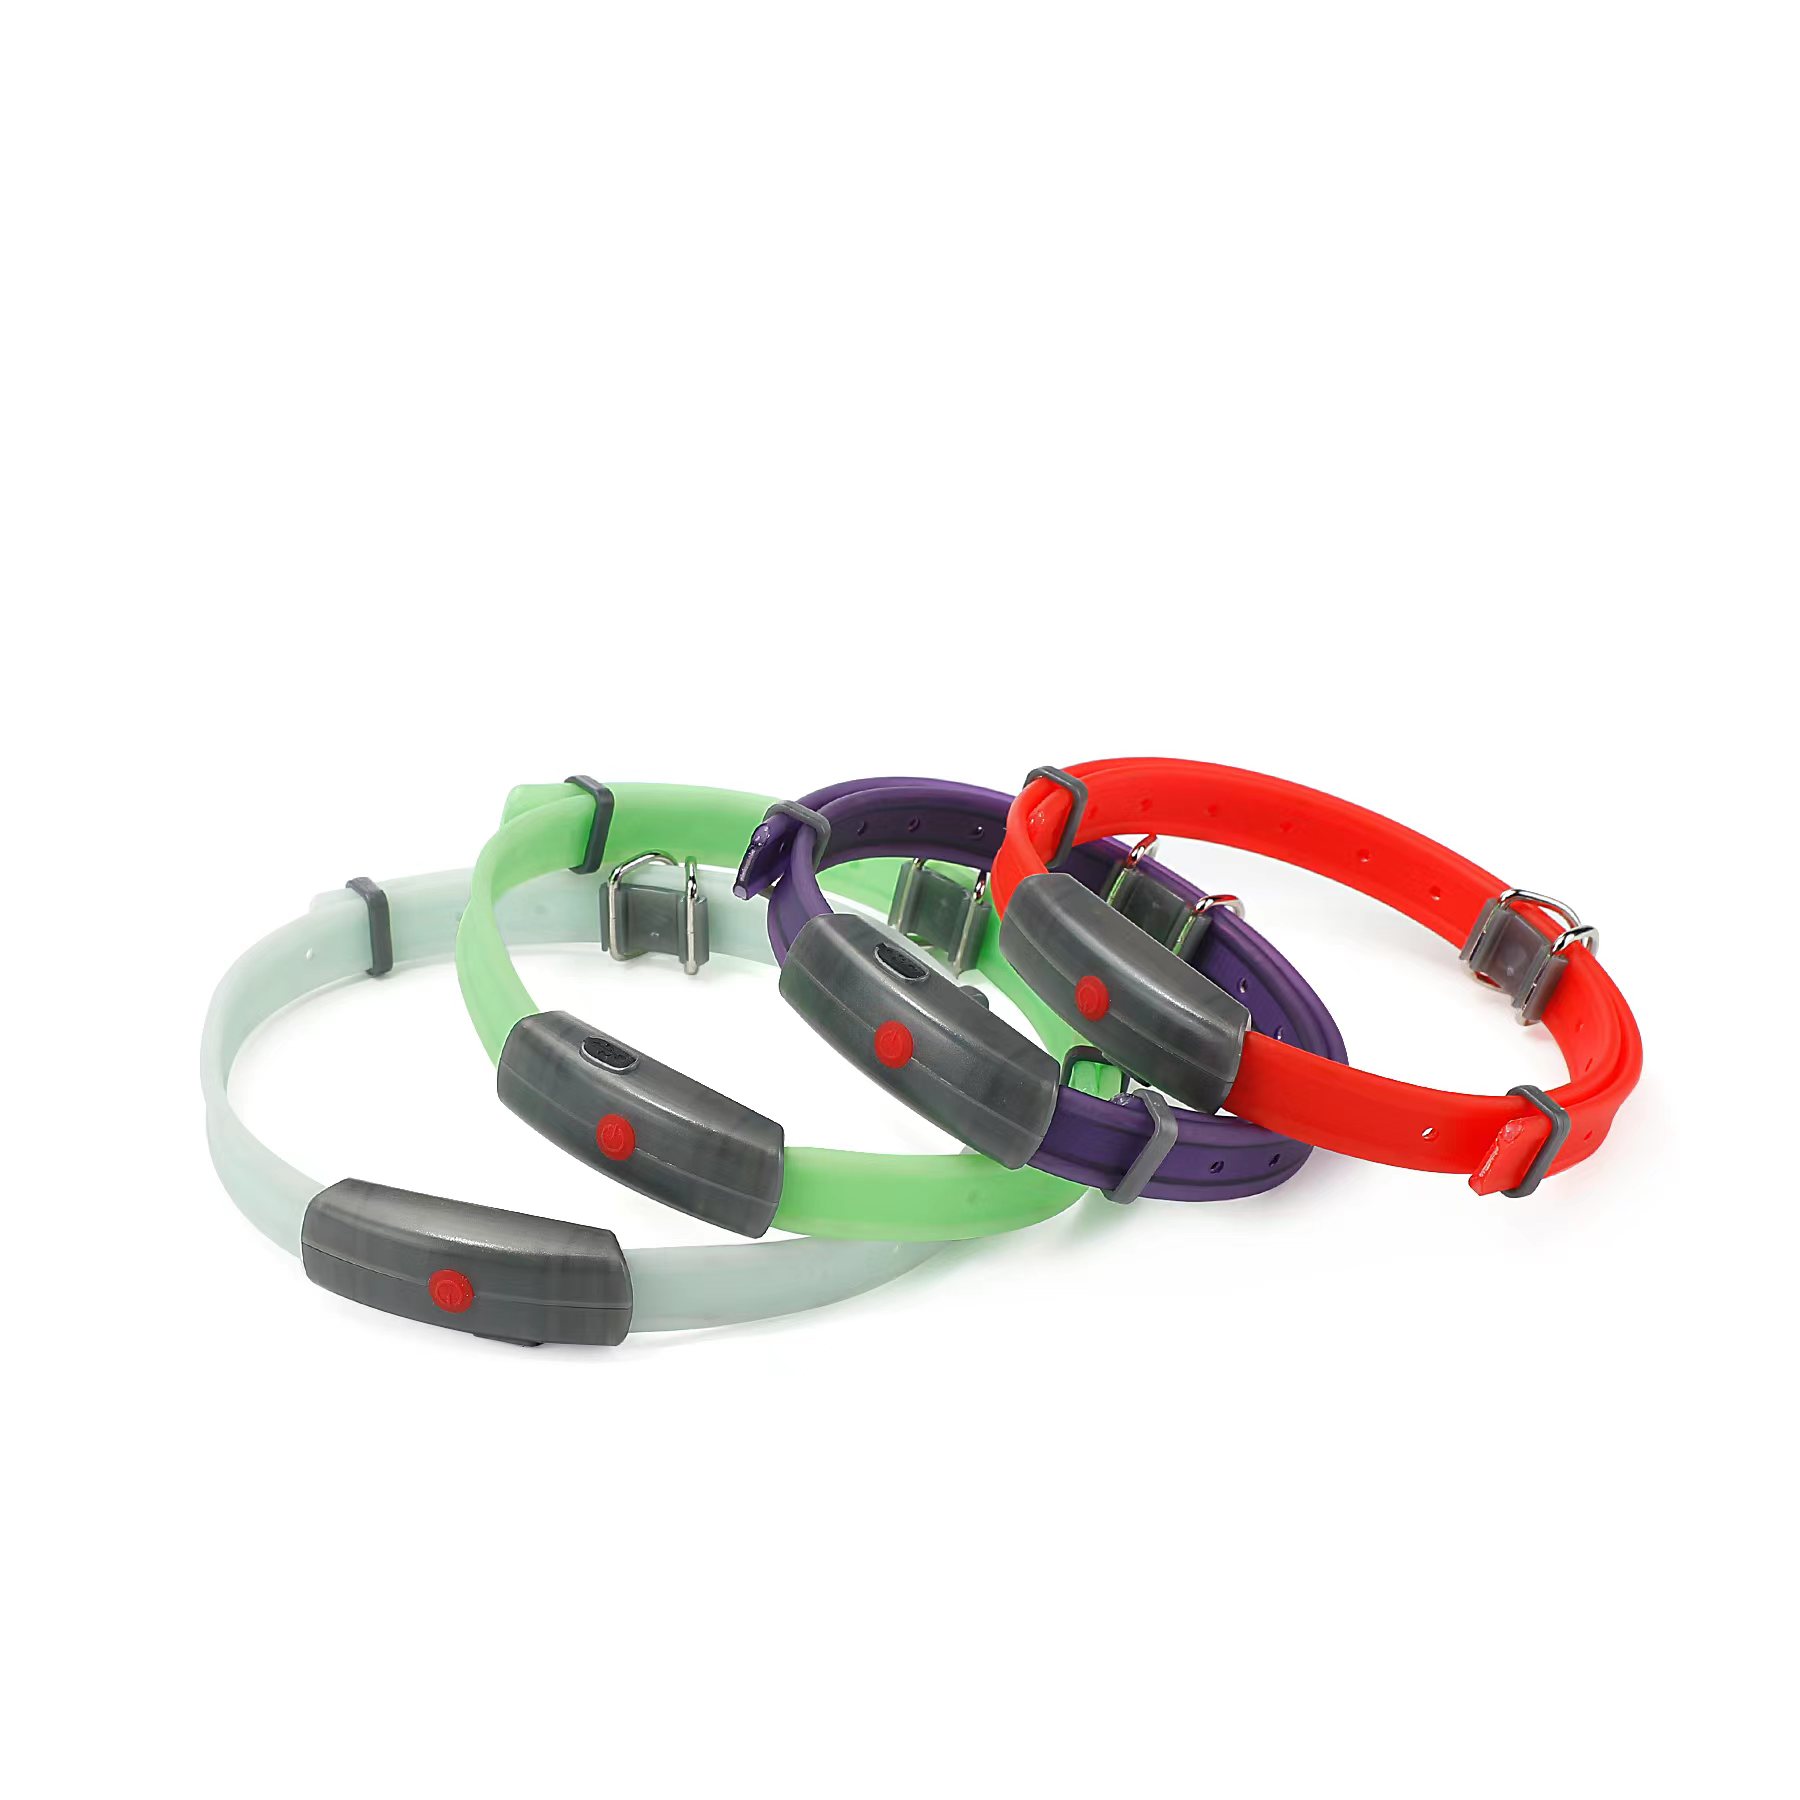 Petwant LED Pet collars with Good flexibility not easy to break can be bent and use for night walk notice-petwant